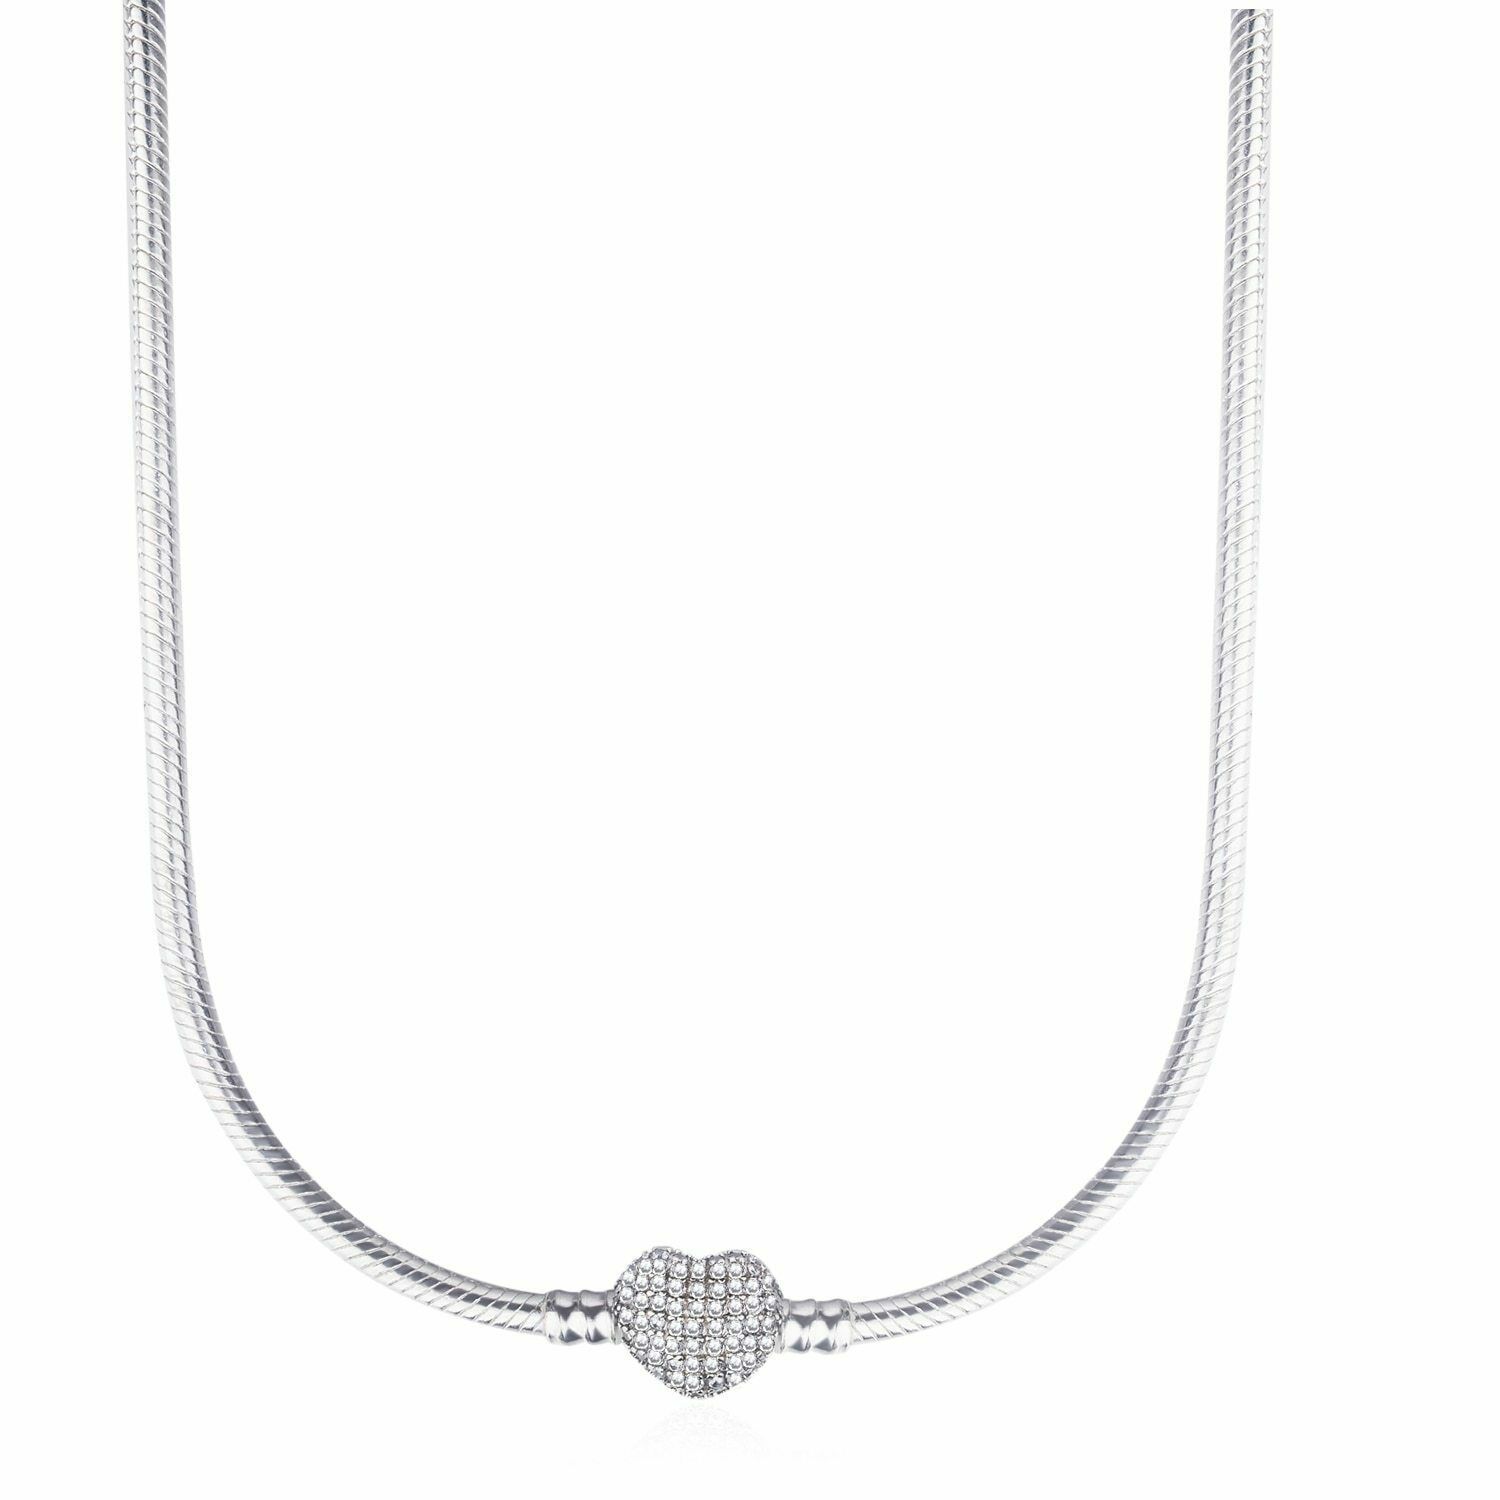 Details About 925 Sterling Silver Necklace Pandora Moments Pave Crystal  Heart Snake Chain Pertaining To Recent Pandora Moments Snake Chain Necklaces (View 8 of 25)